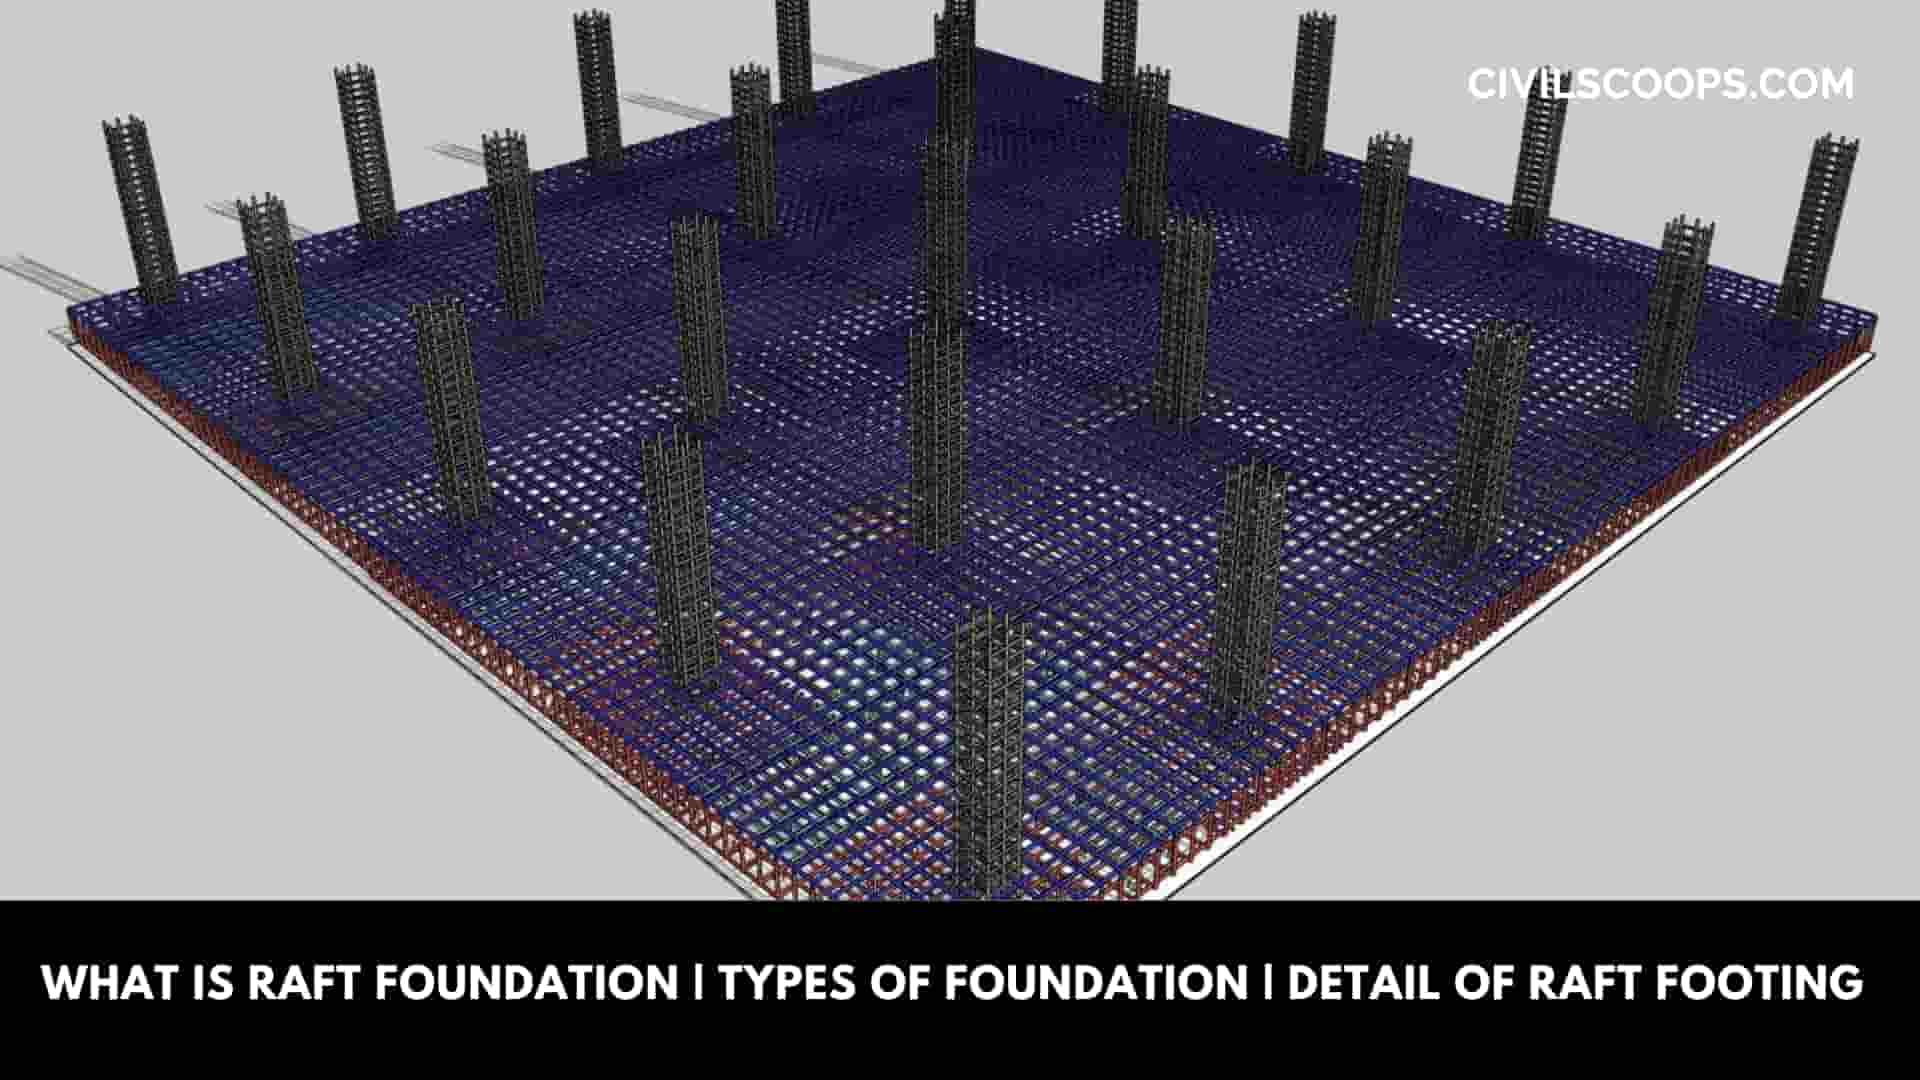 What Is Raft Foundation Types of Foundation Detail of Raft Footing